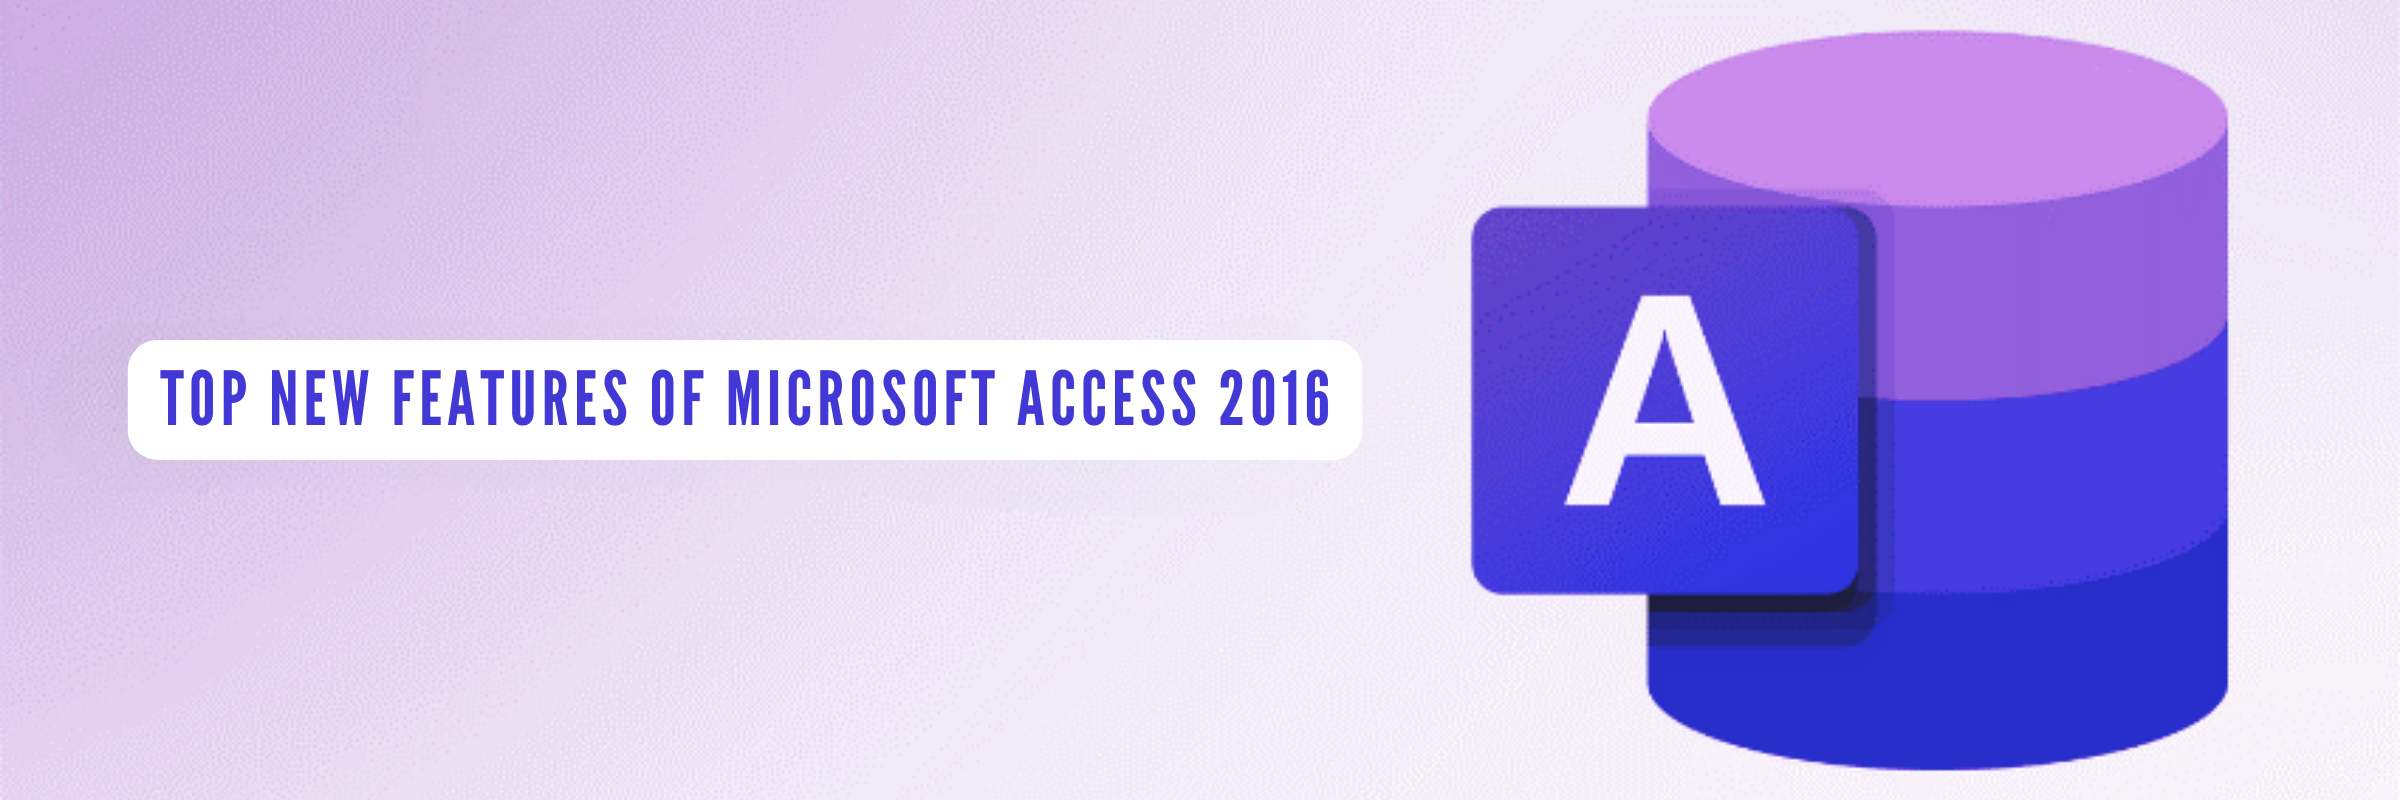 Top New Features of Microsoft Access 2016